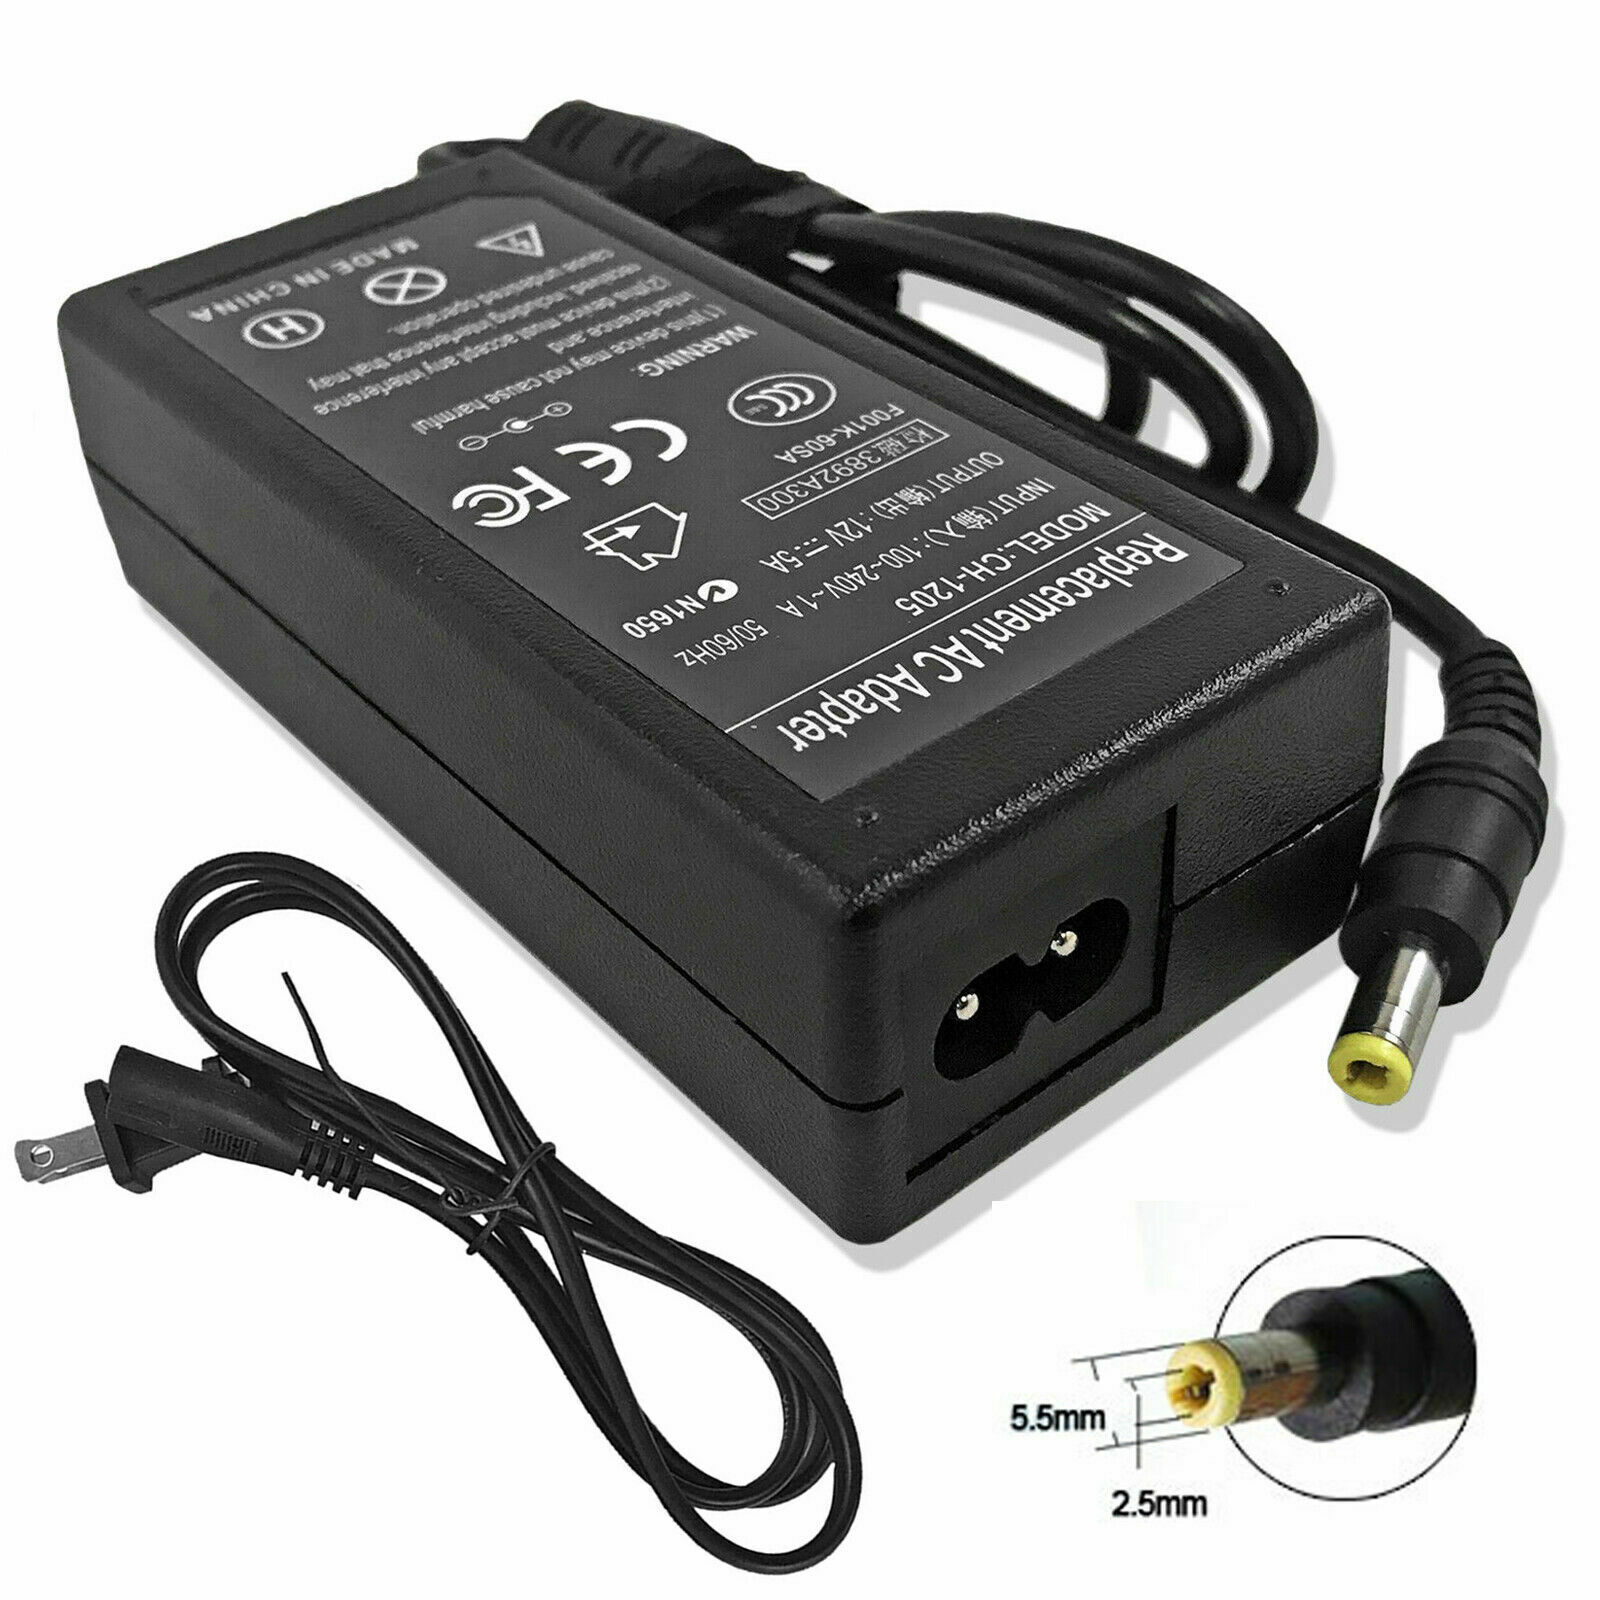 12V AC Adapter For Sirius Radio Boombox SUBX1 SUBX2 Charger Power Supply Cord Type: AC/DC Adapter MPN: Does Not App - Click Image to Close